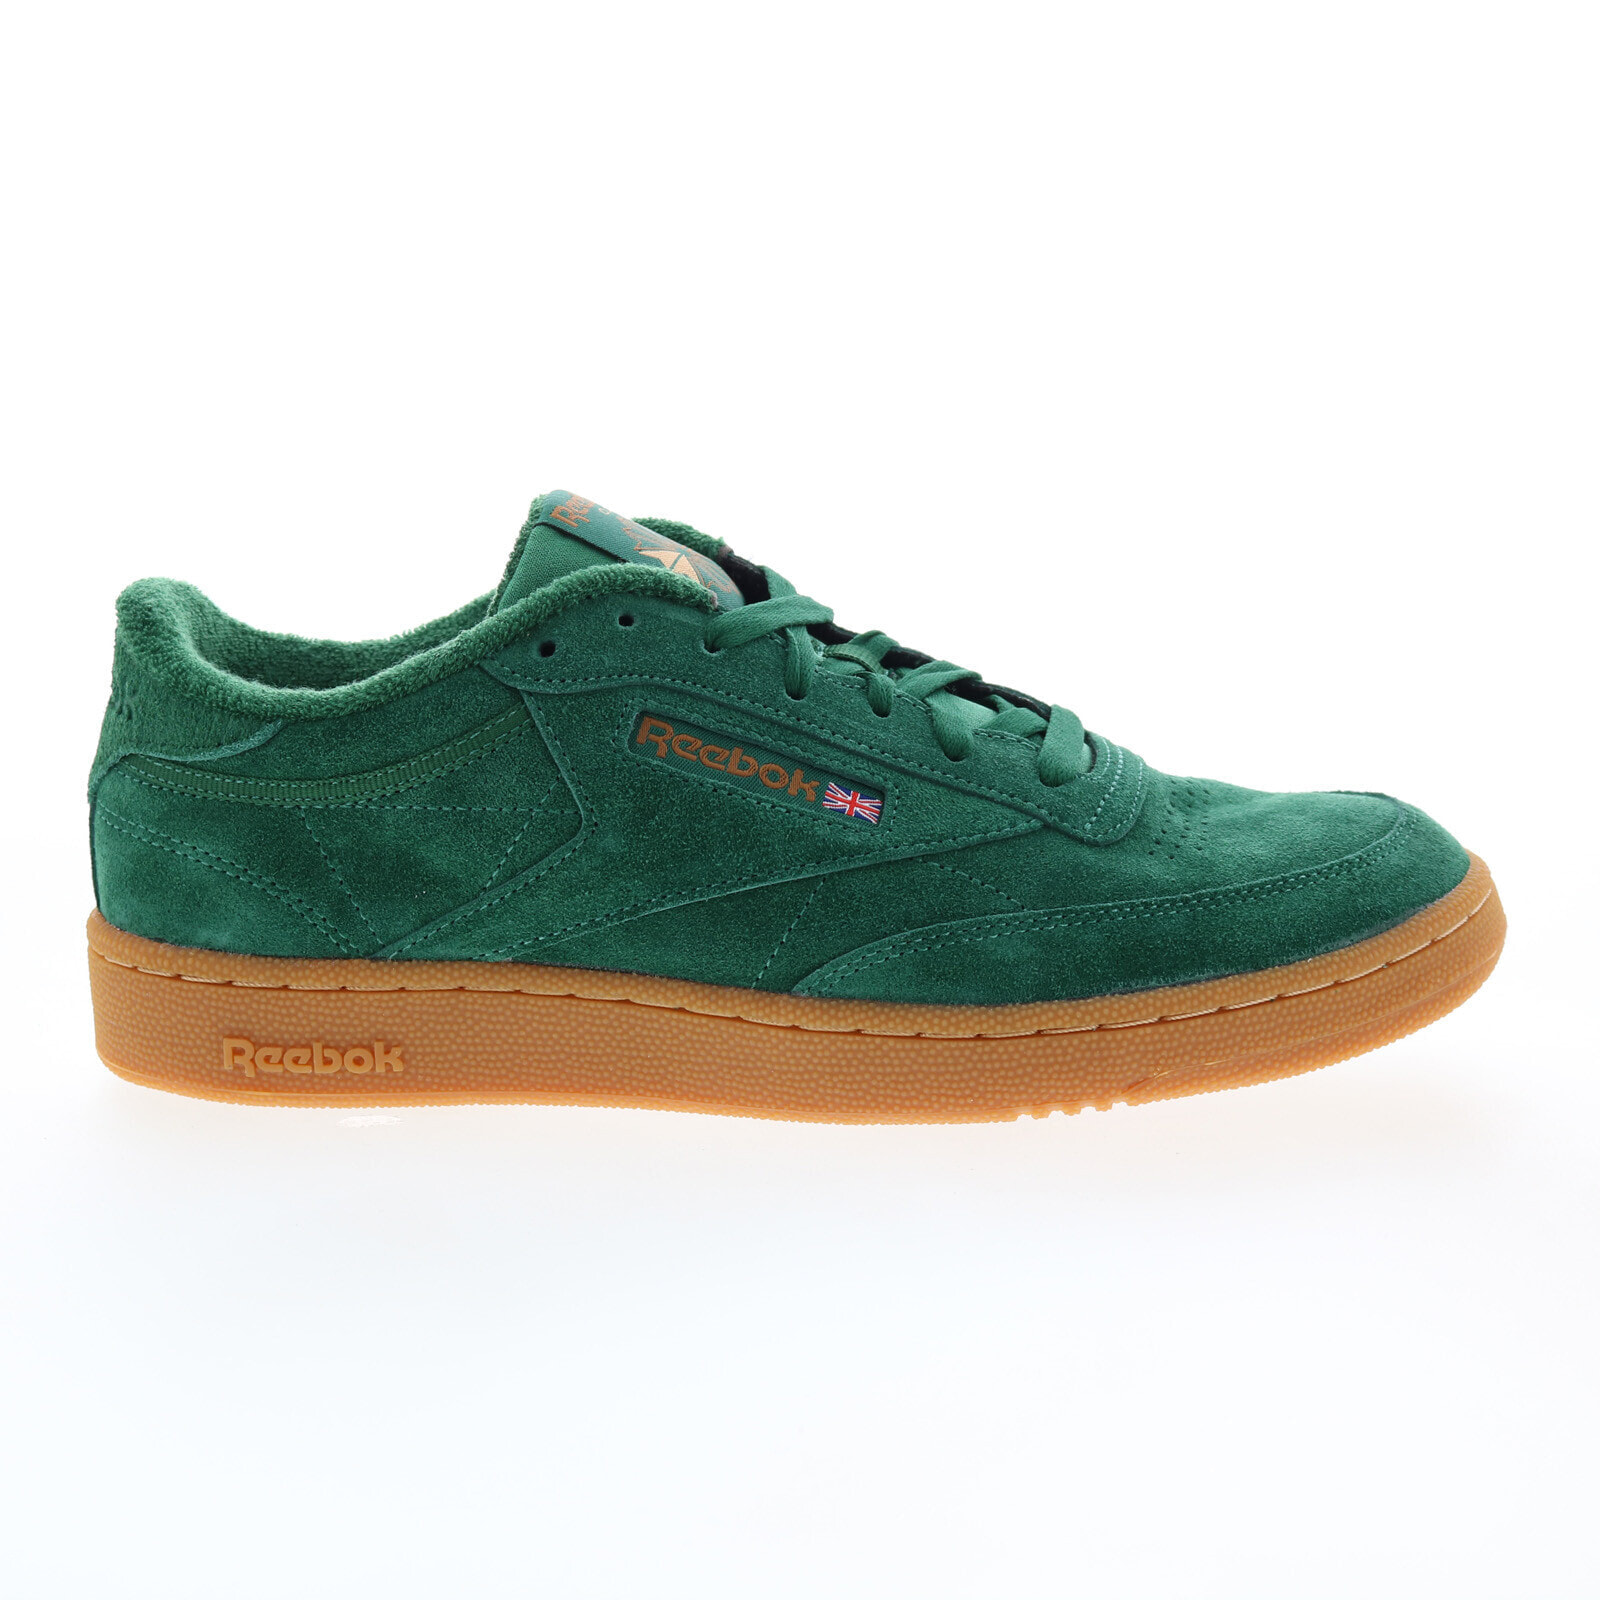 Reebok Club C 85 GZ1871 Mens Green Suede Lifestyle Sneakers Shoes